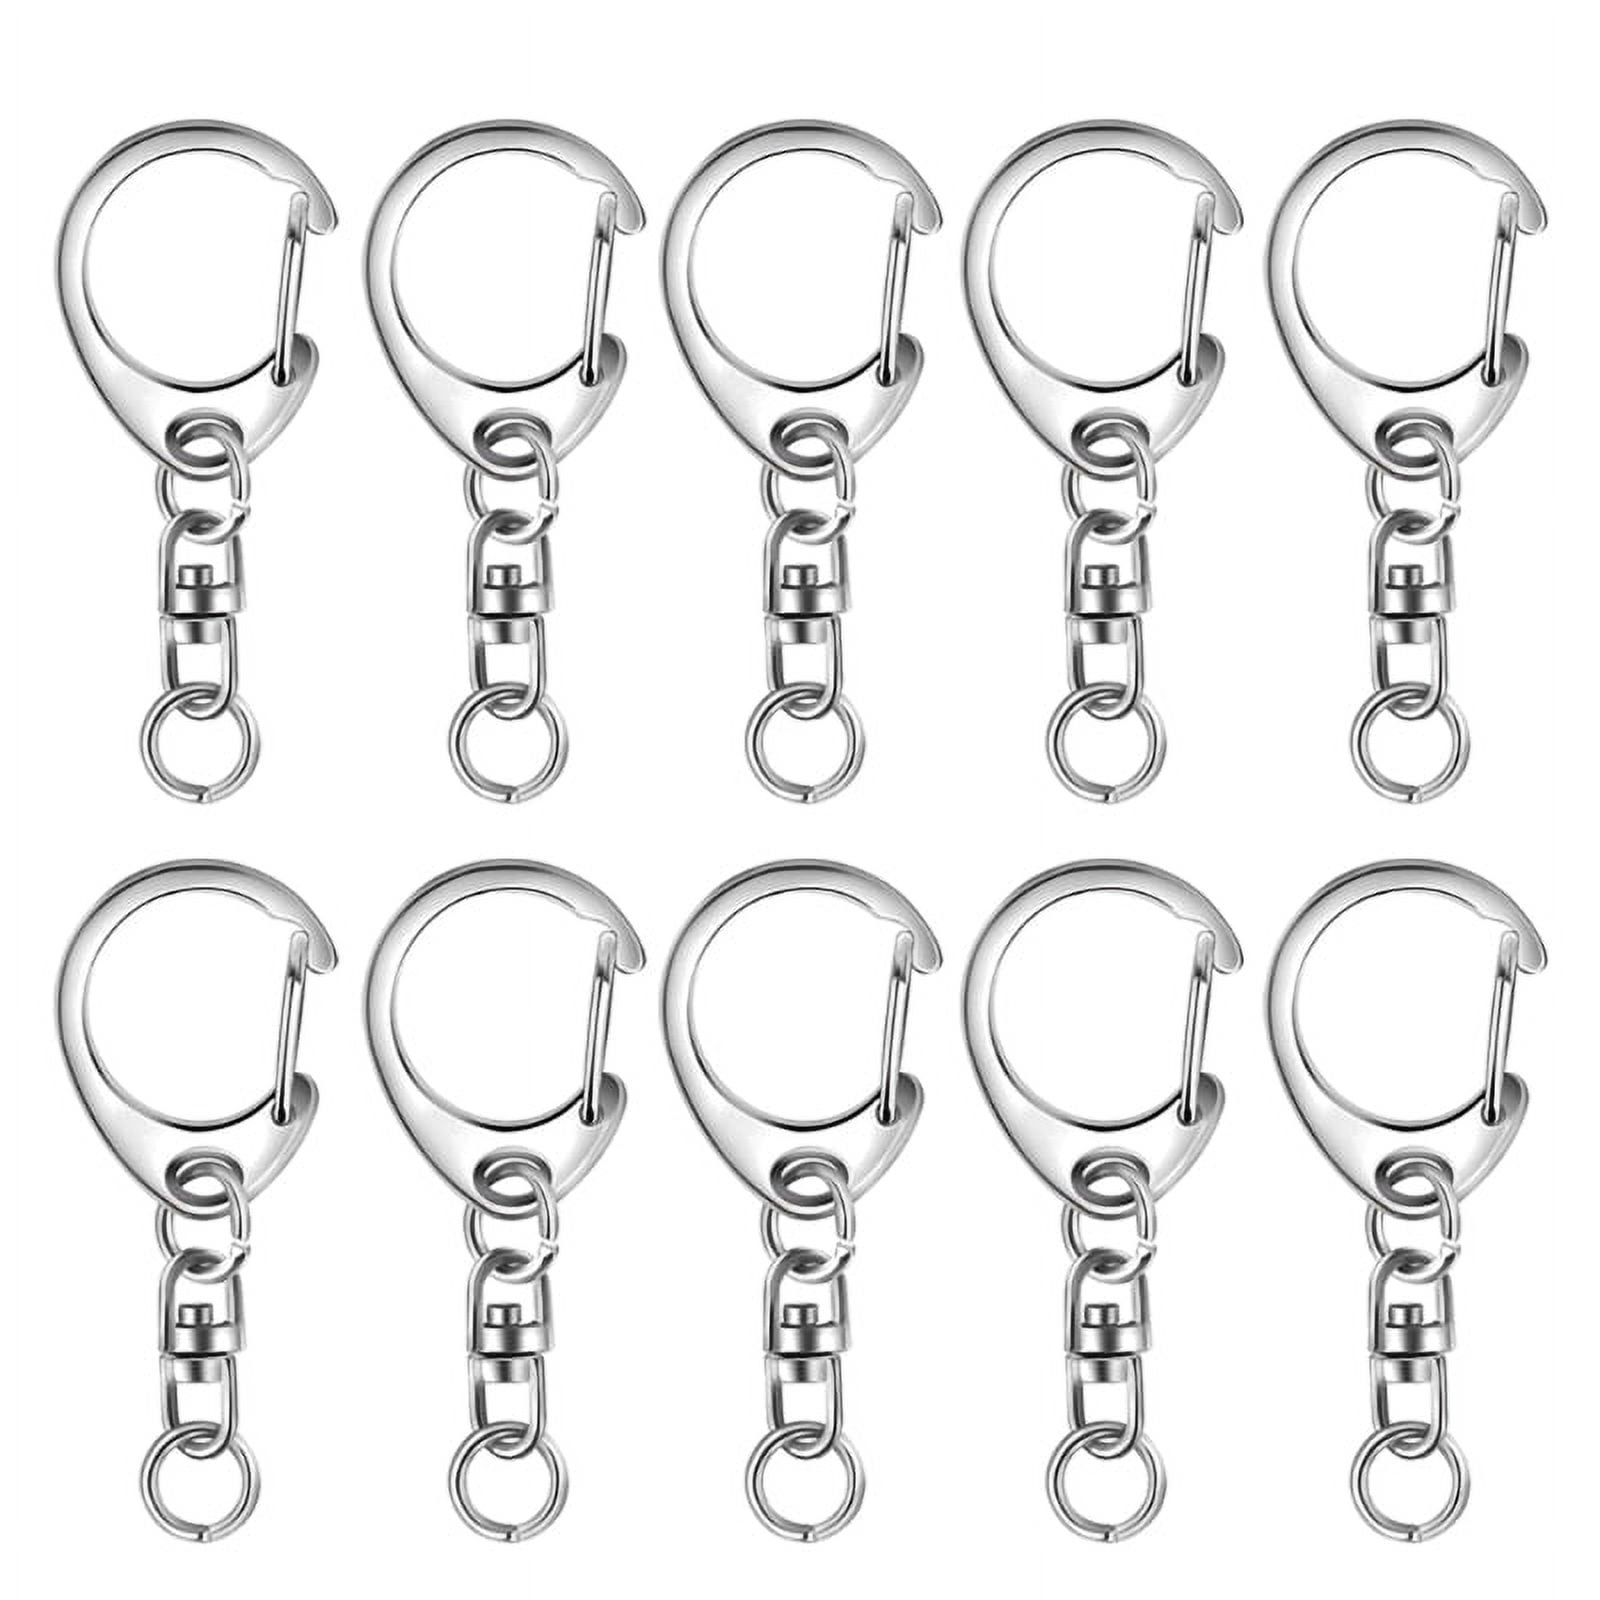 Small Key Chain Ring 50 PCS Metal Split Rings 20mm Stainless Steel Flat  Rings with Excellent Spring Retention for Keys Organization/Jewlery Making